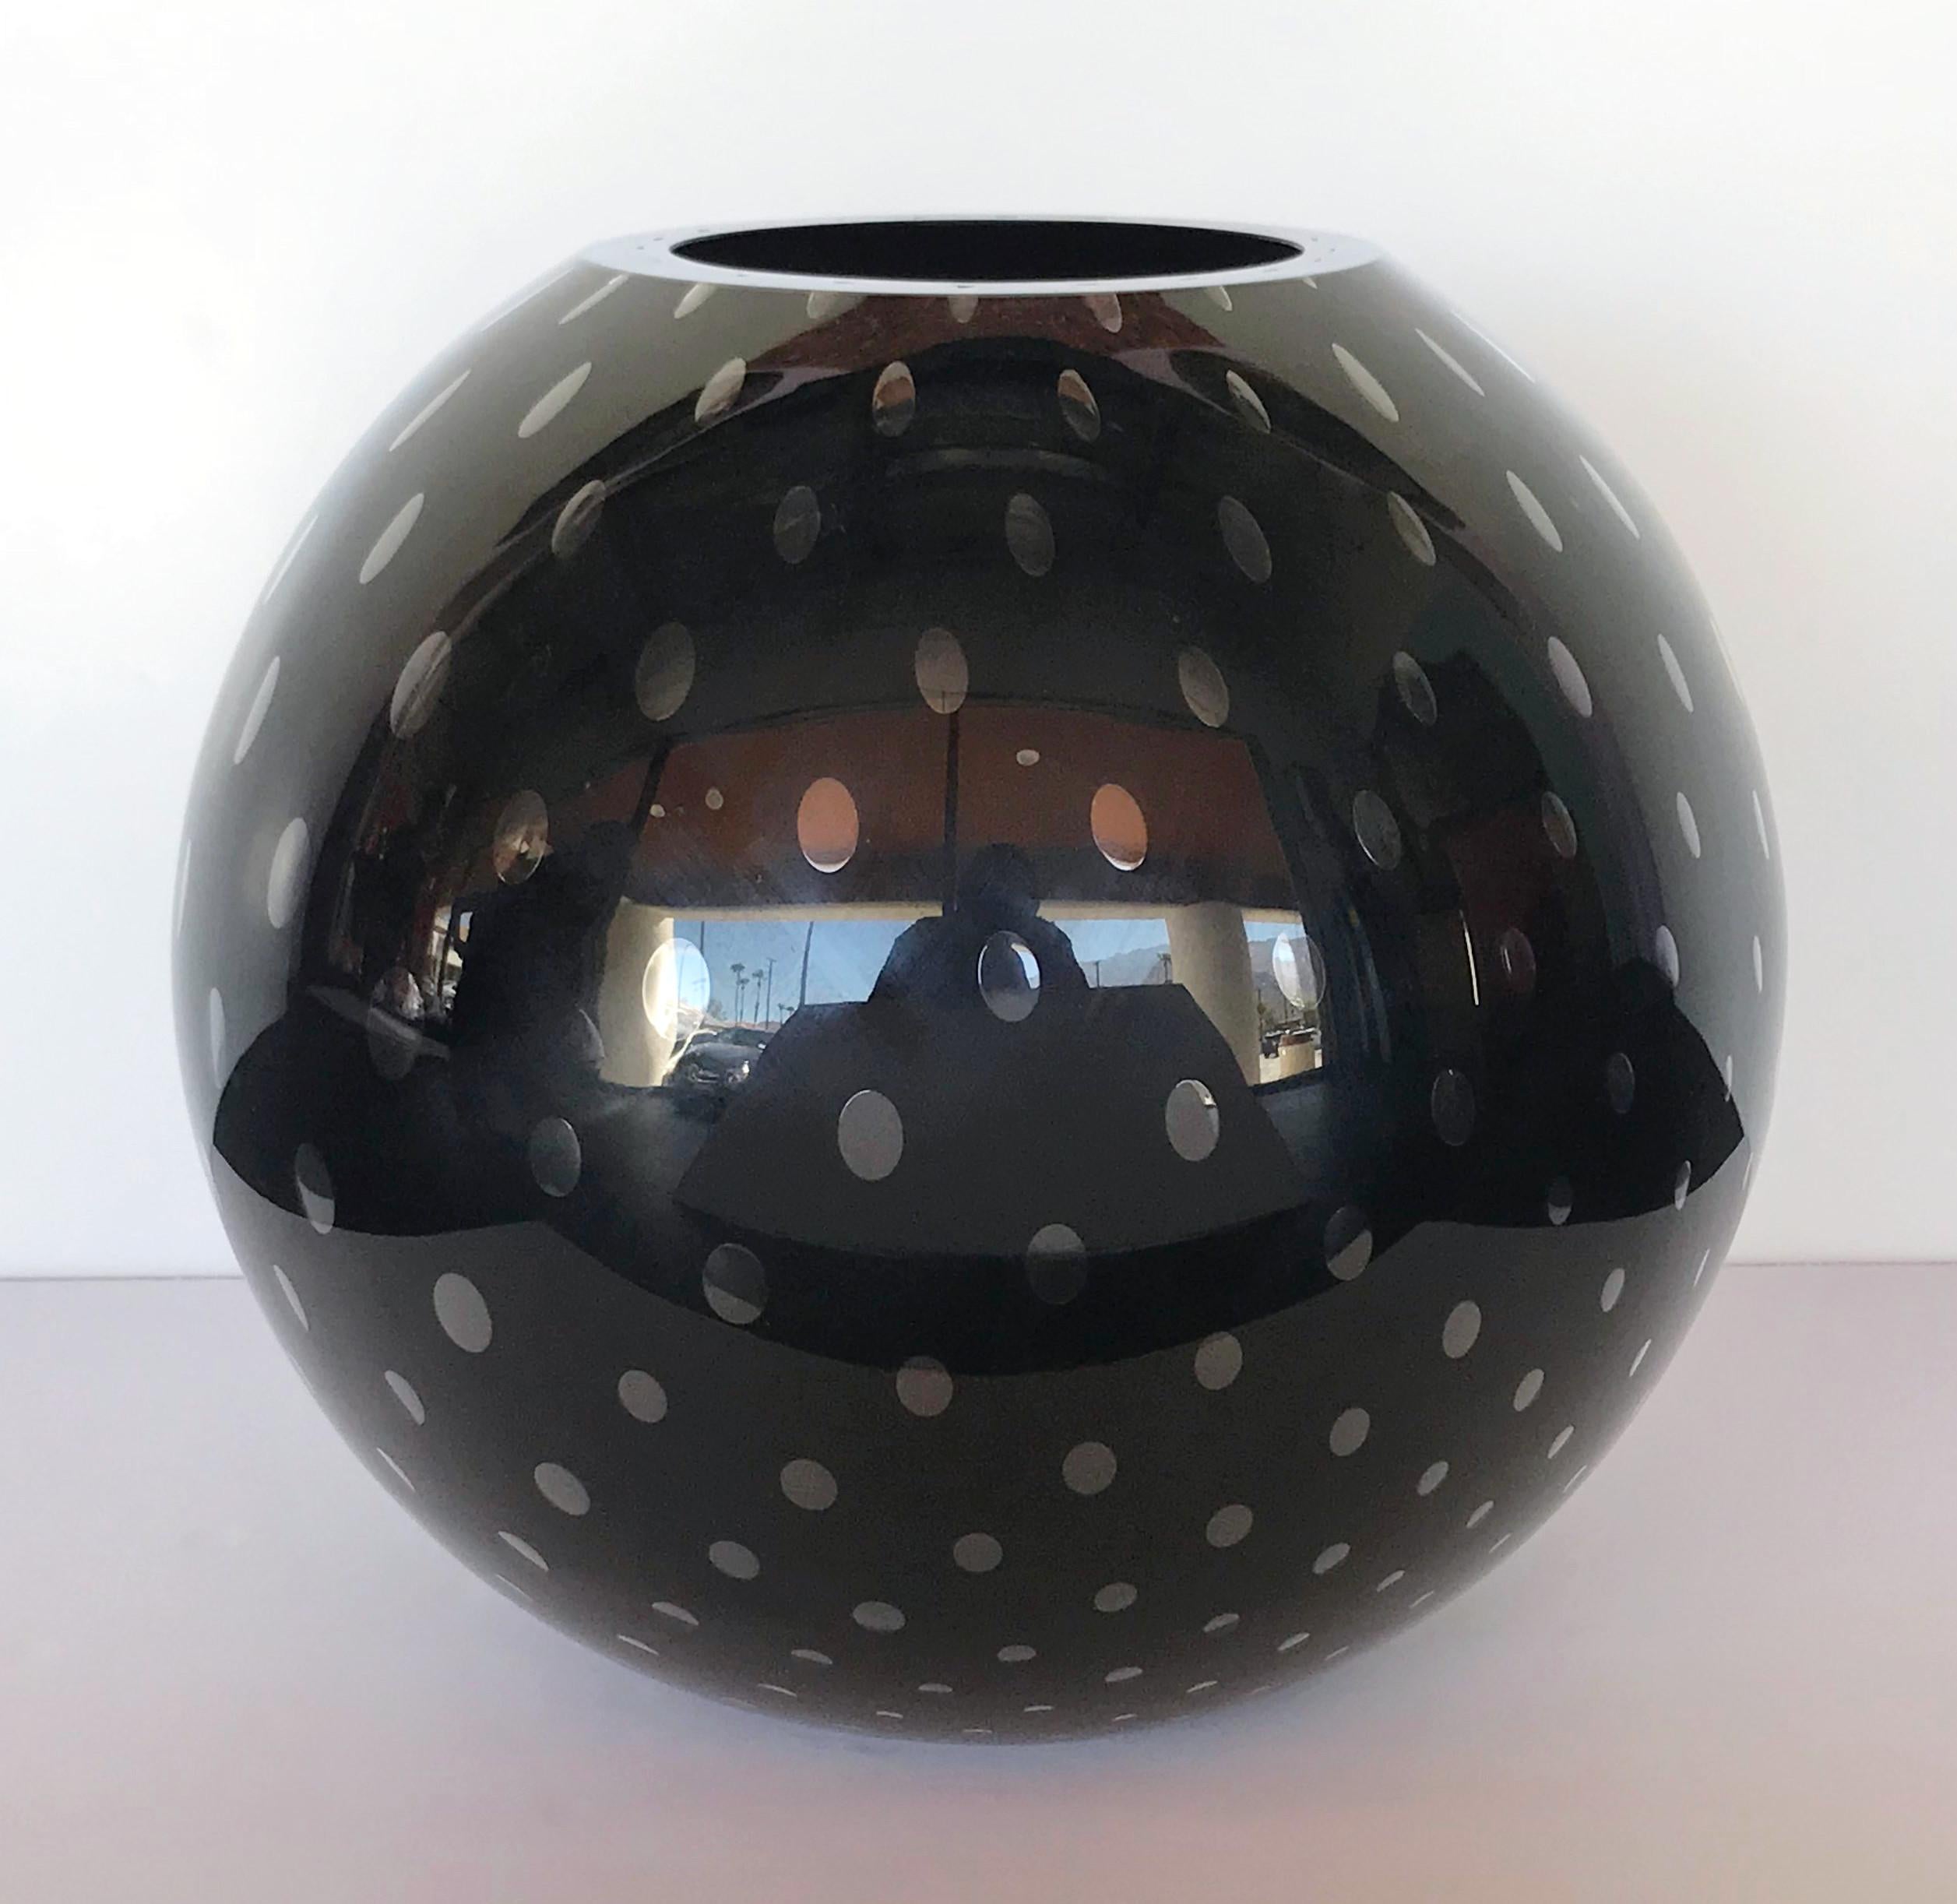 Italian vase or sculpture in thick black Murano glass blown with bubbles inside the glass in Pulegoso technique by Alberto Dona for Fabio Ltd
Signature engraved on the base / Made in Italy 
Diameter: 13 inches / Height: 12 inches
1 in stock in Palm